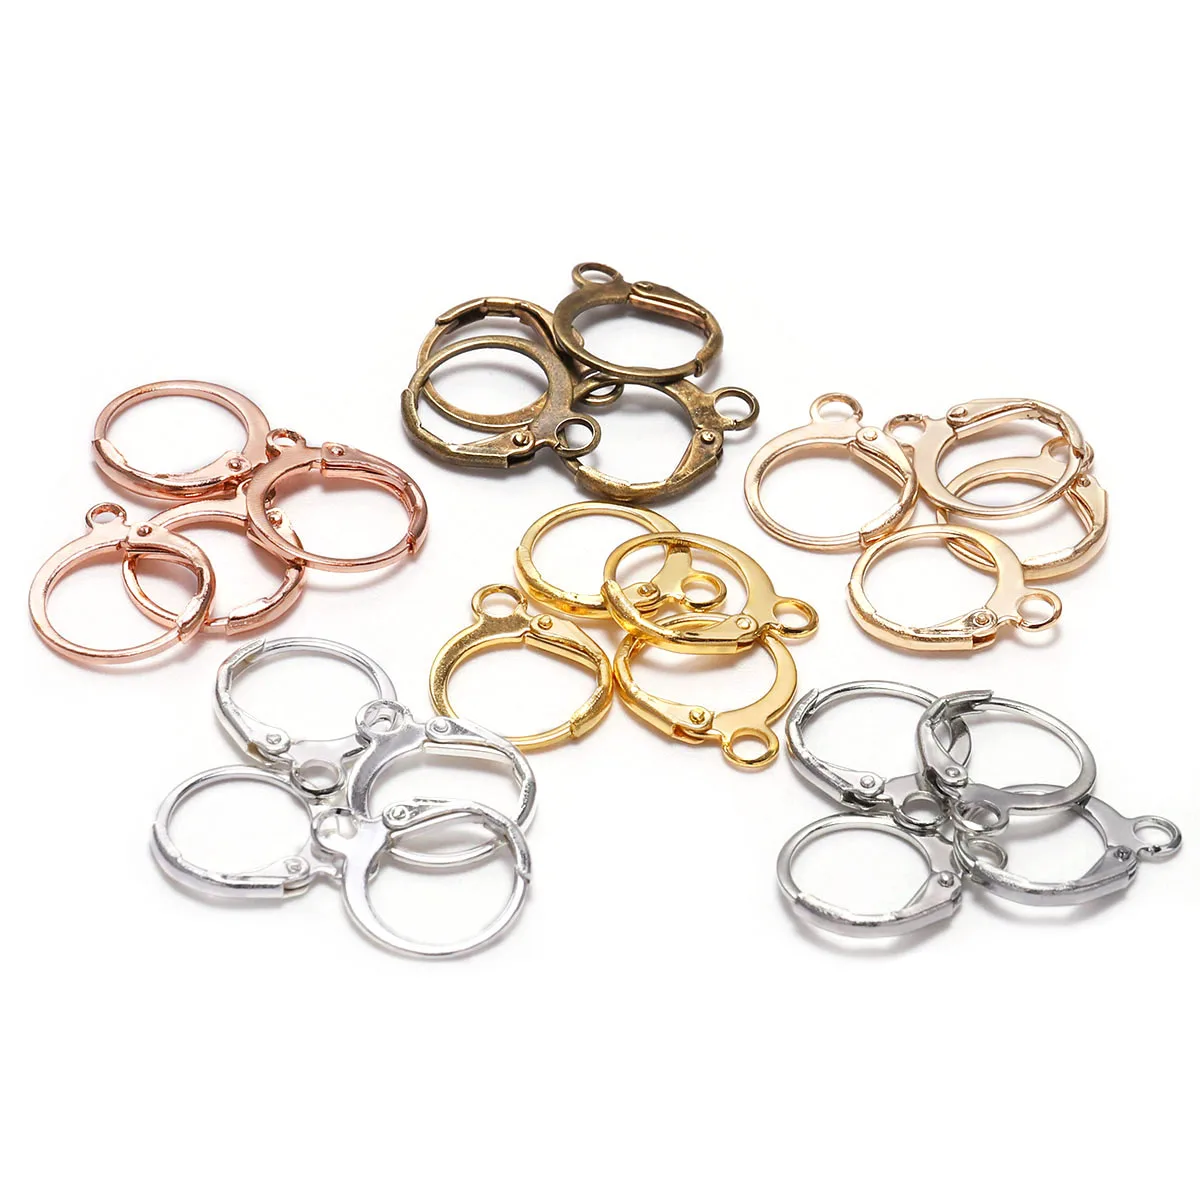 50pcs/lot Gold Silver French Lever Earring Hooks Wire Settings Base Hoops Earrings For DIY Jewelry Making Supplies Wholesale images - 6